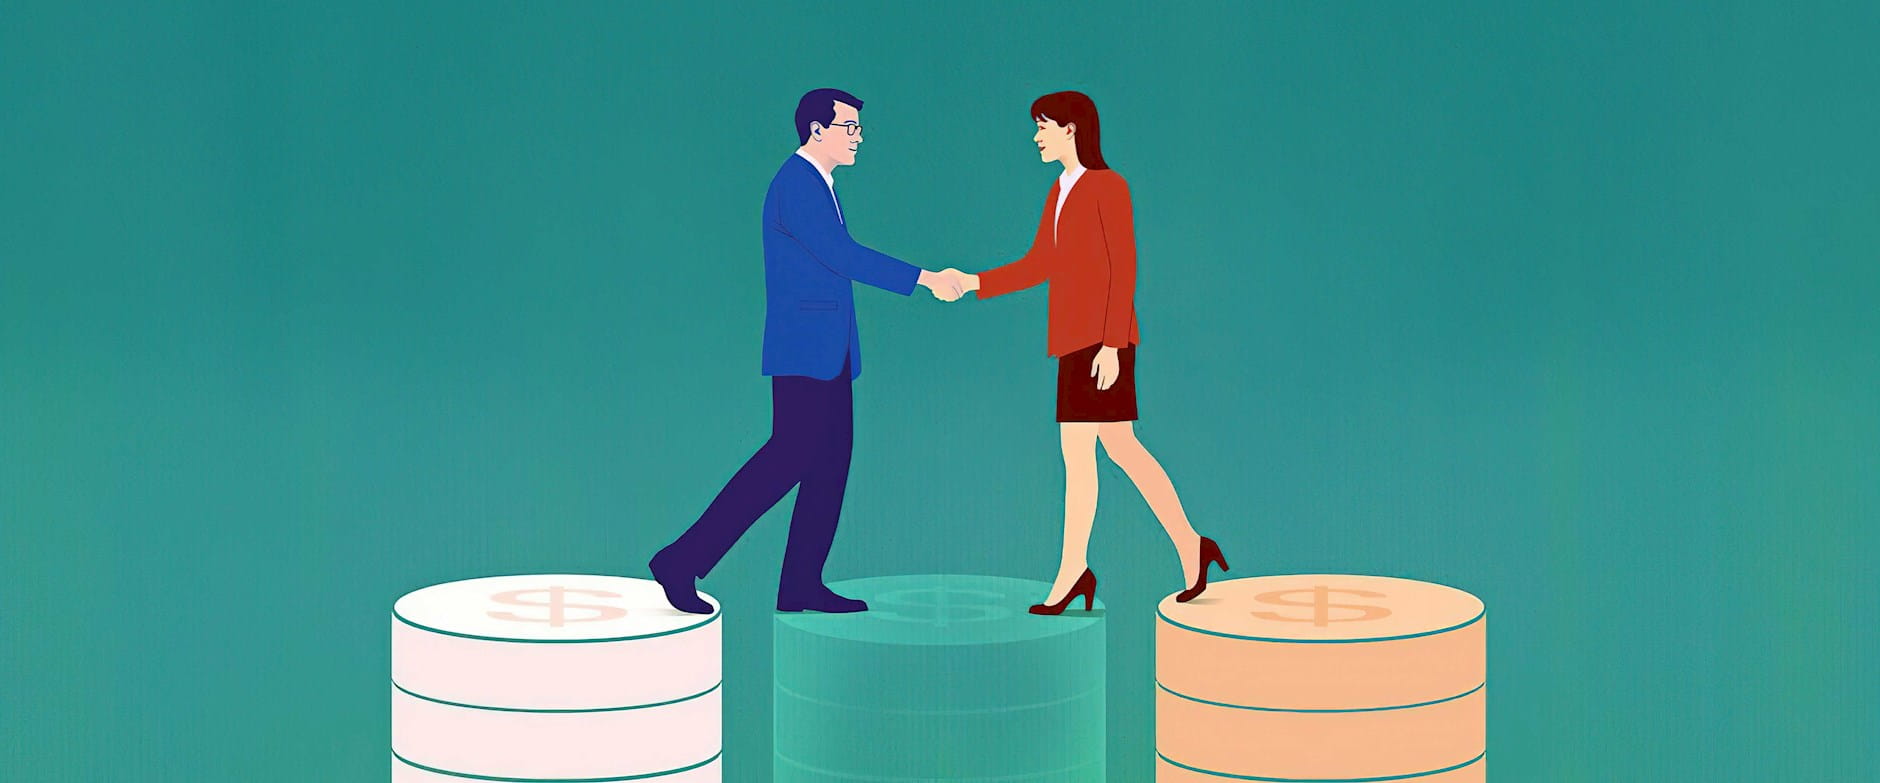 Business people shaking hands while standing on money